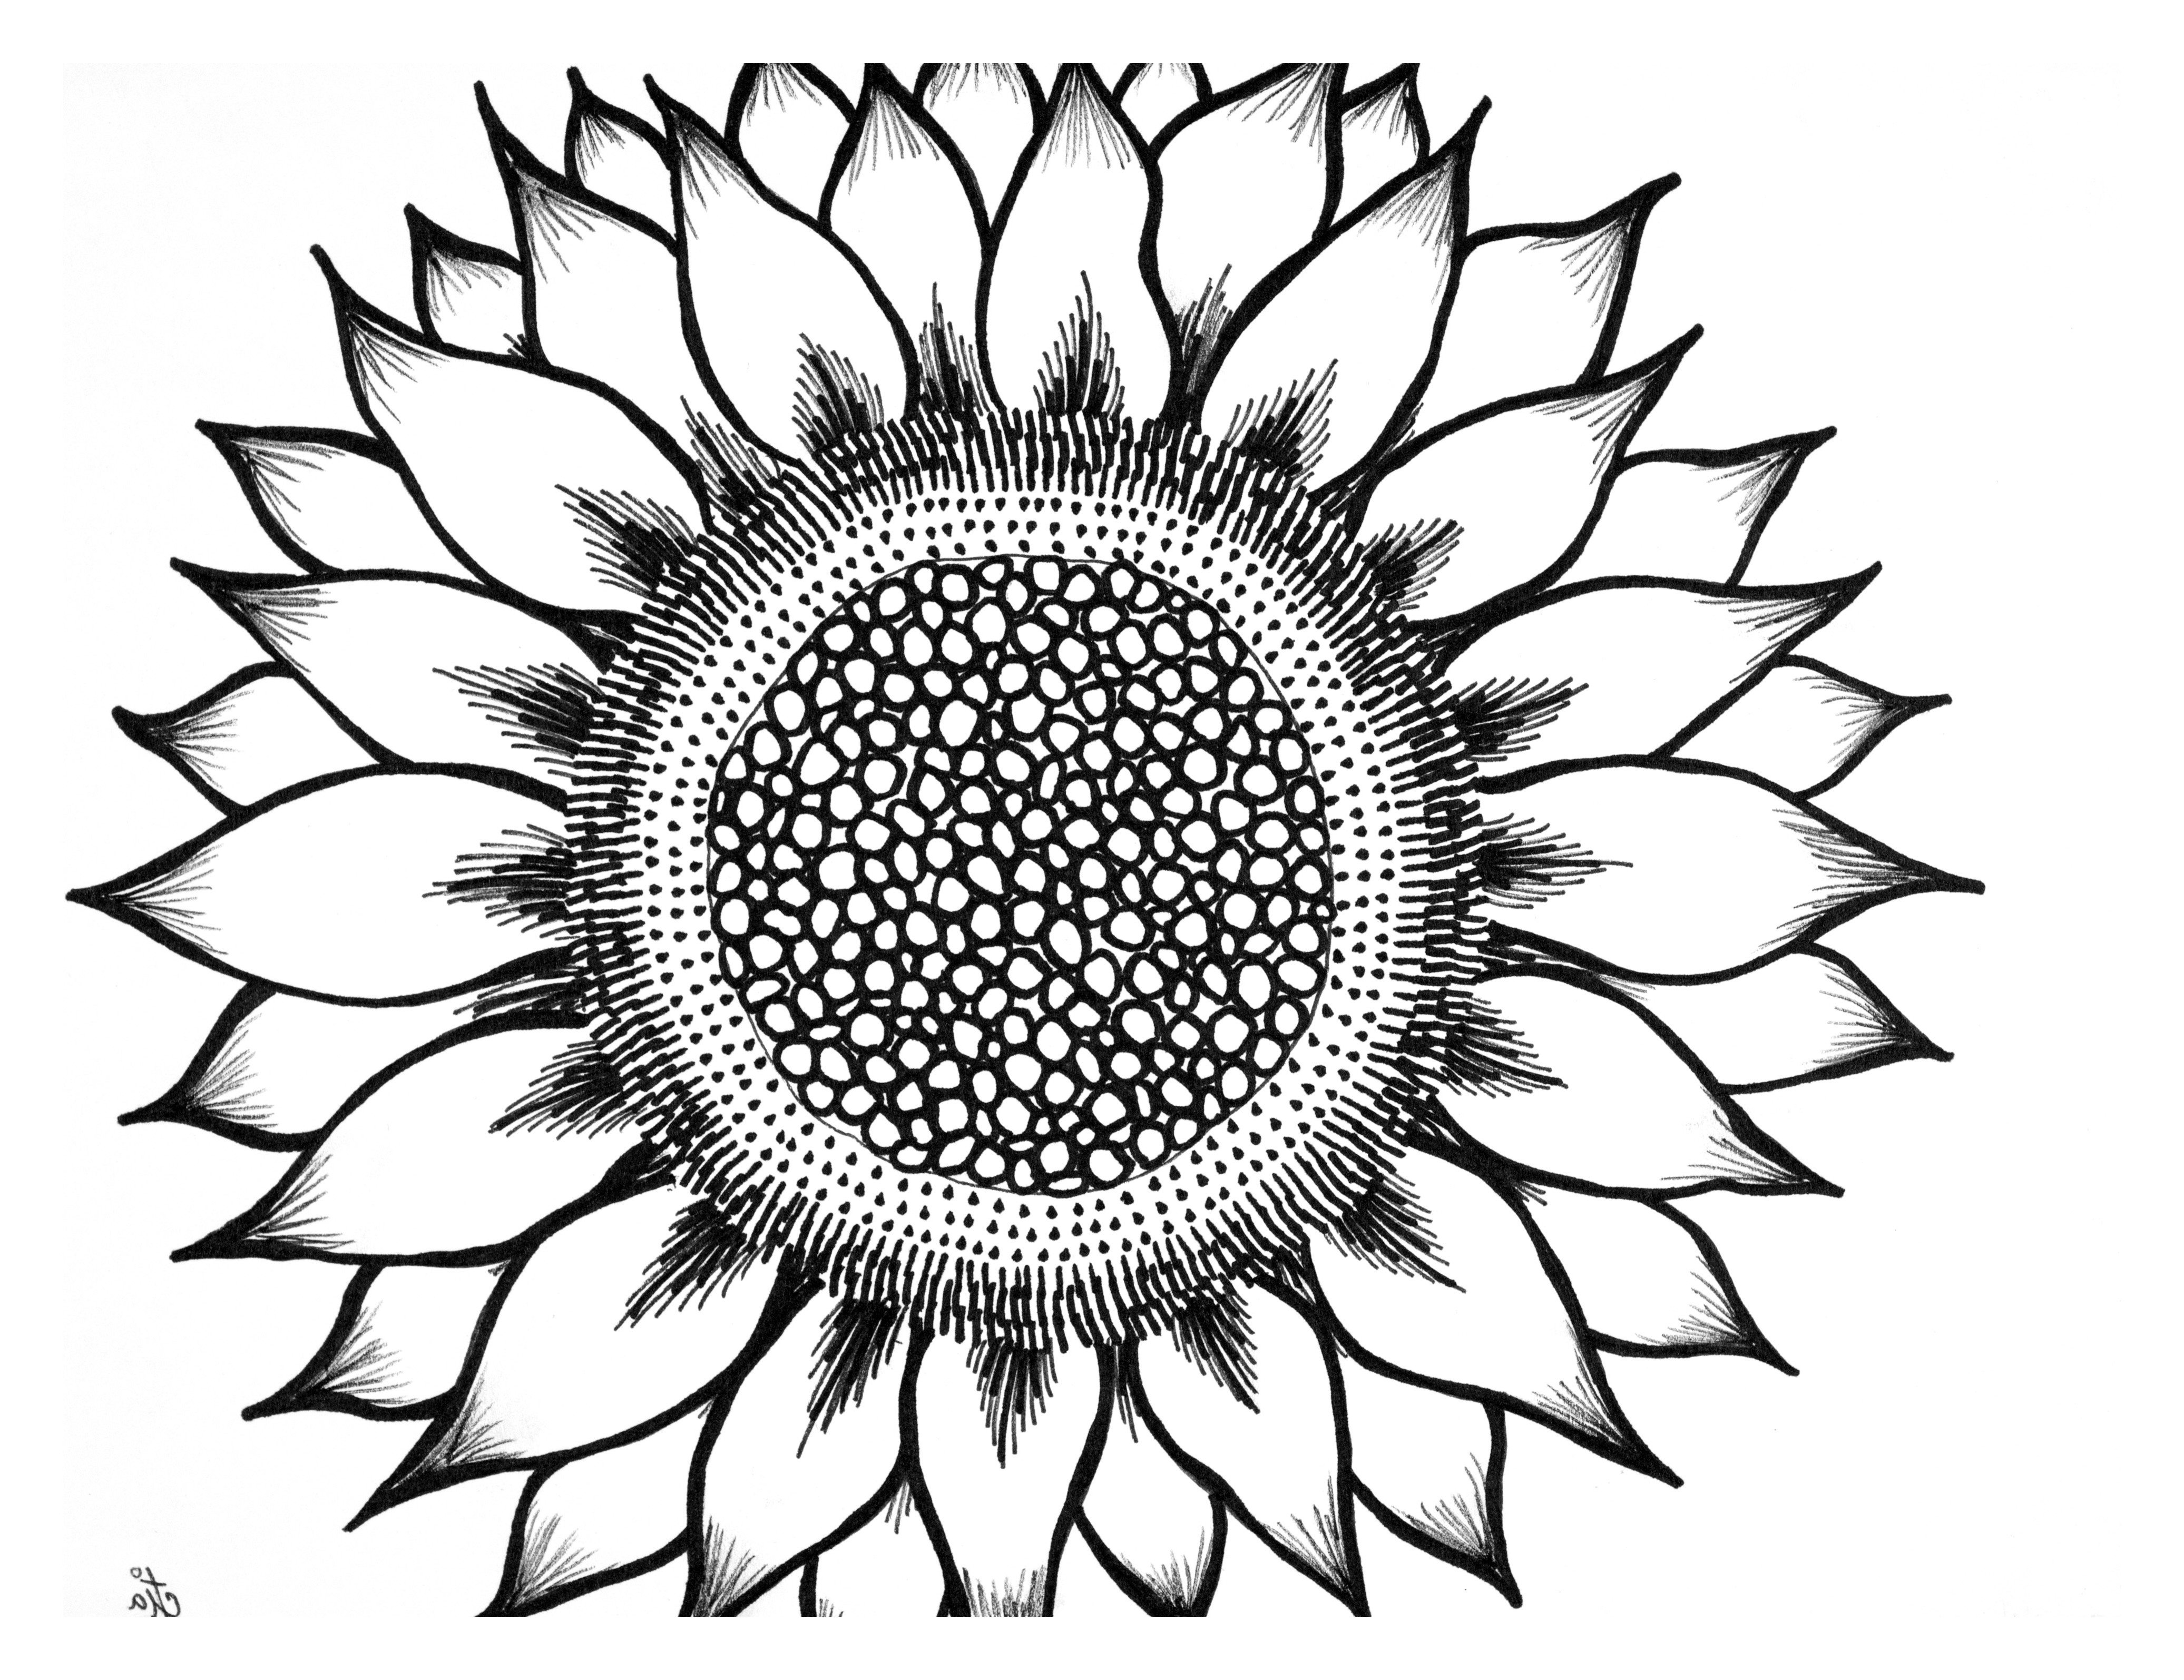 And White Sunflower Drawing   Clipart Panda   Free Clipart Images